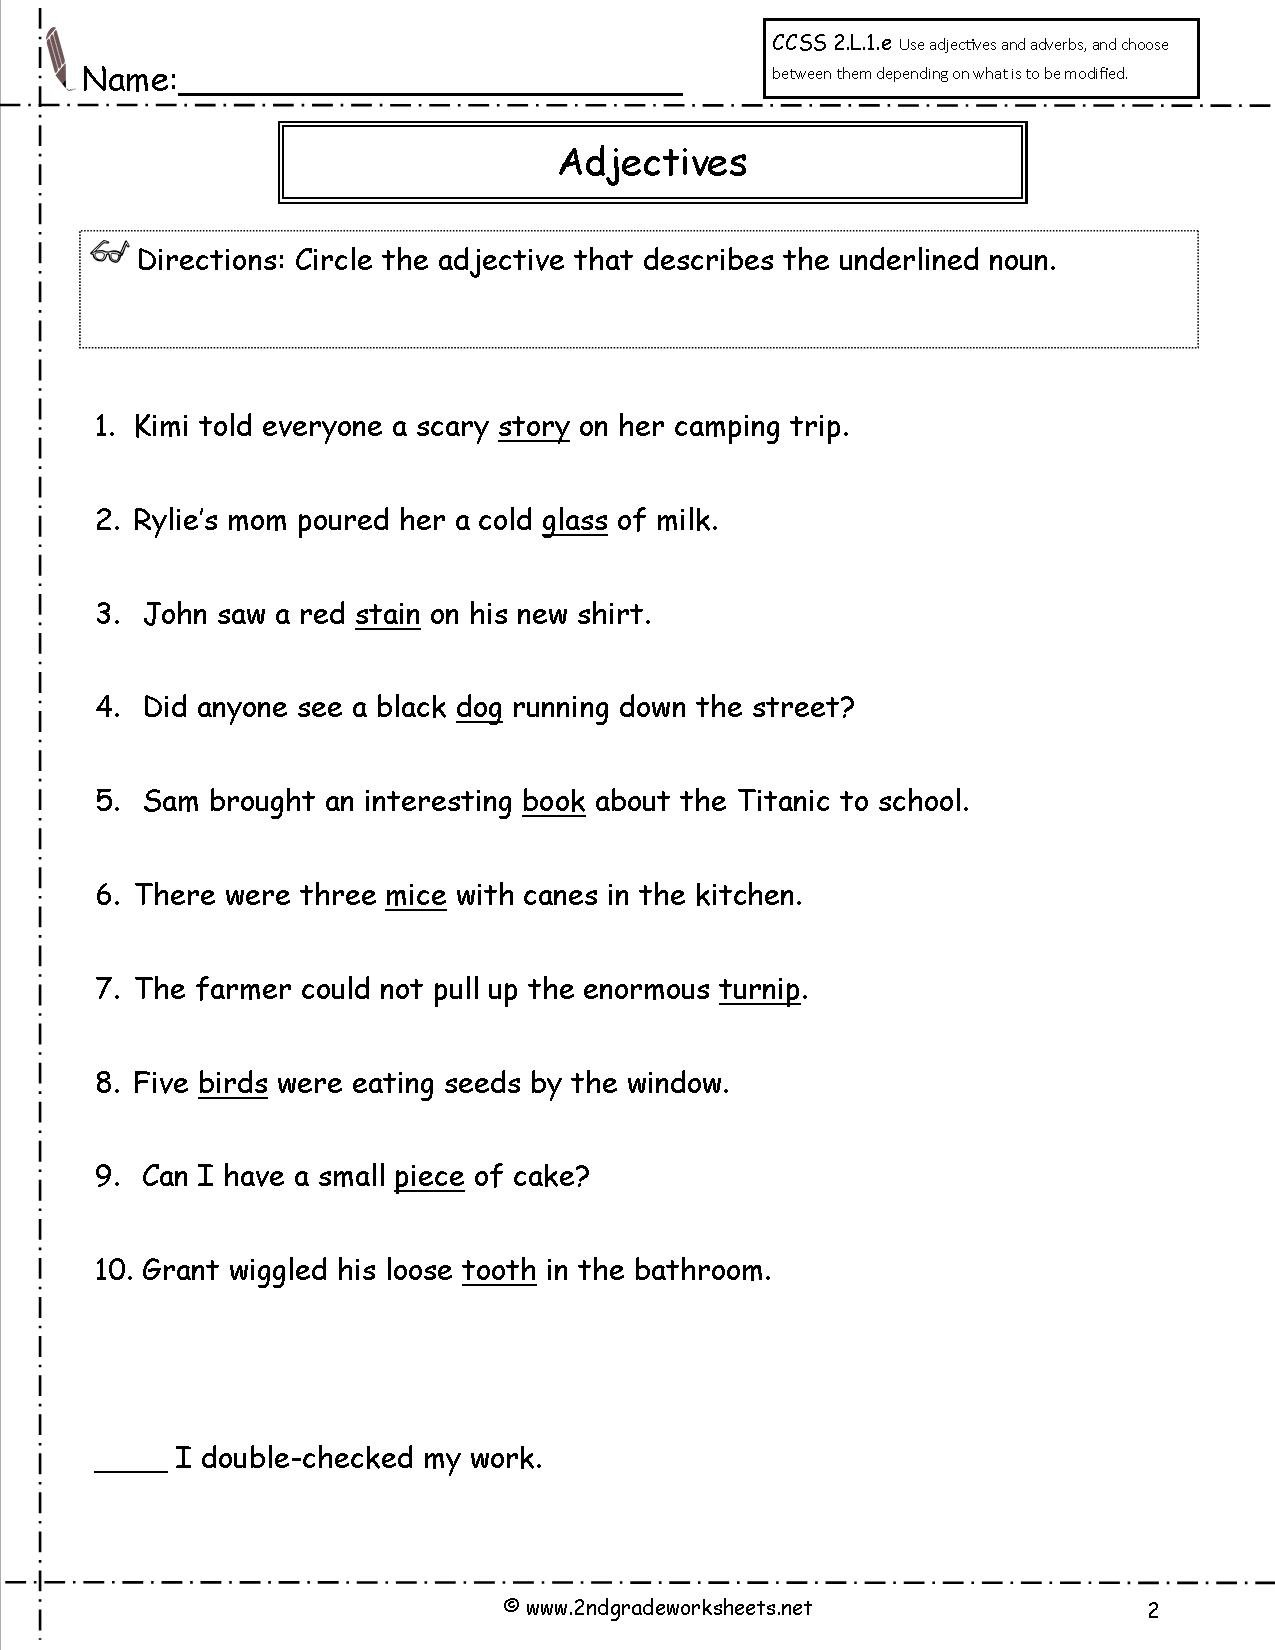 Free Using Adjectives And Adverbs Worksheets Throughout Identifying Adjectives Worksheet